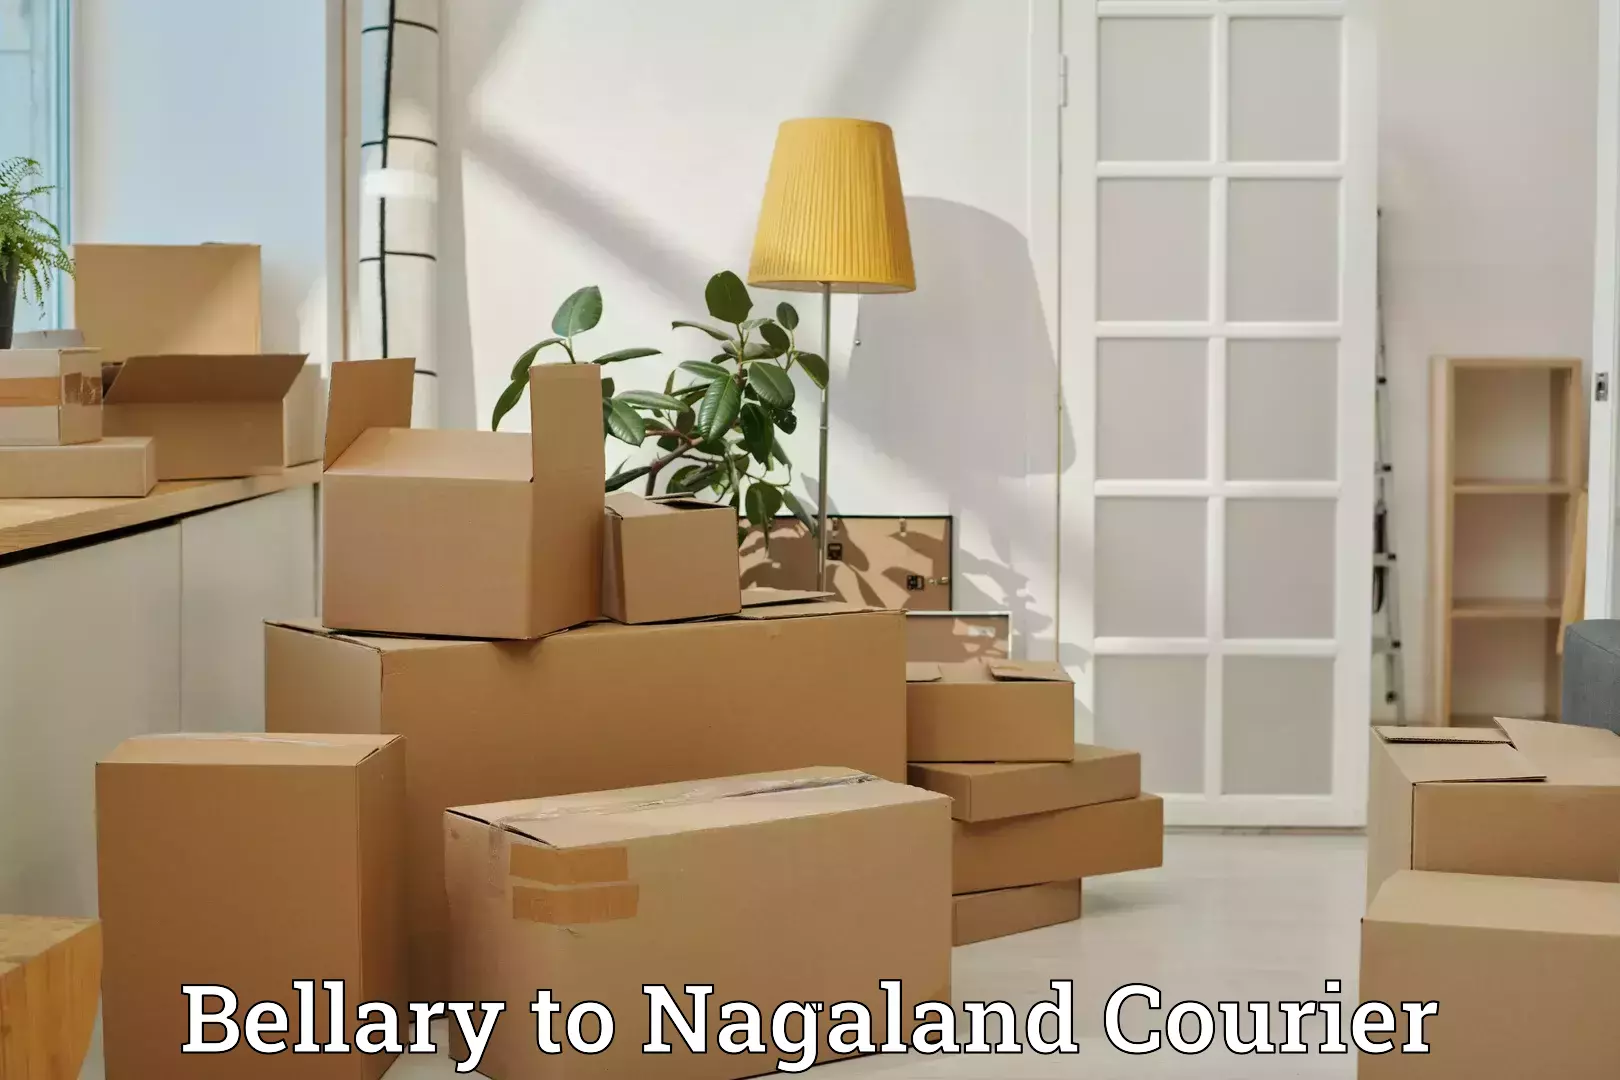 Luggage delivery app Bellary to Nagaland